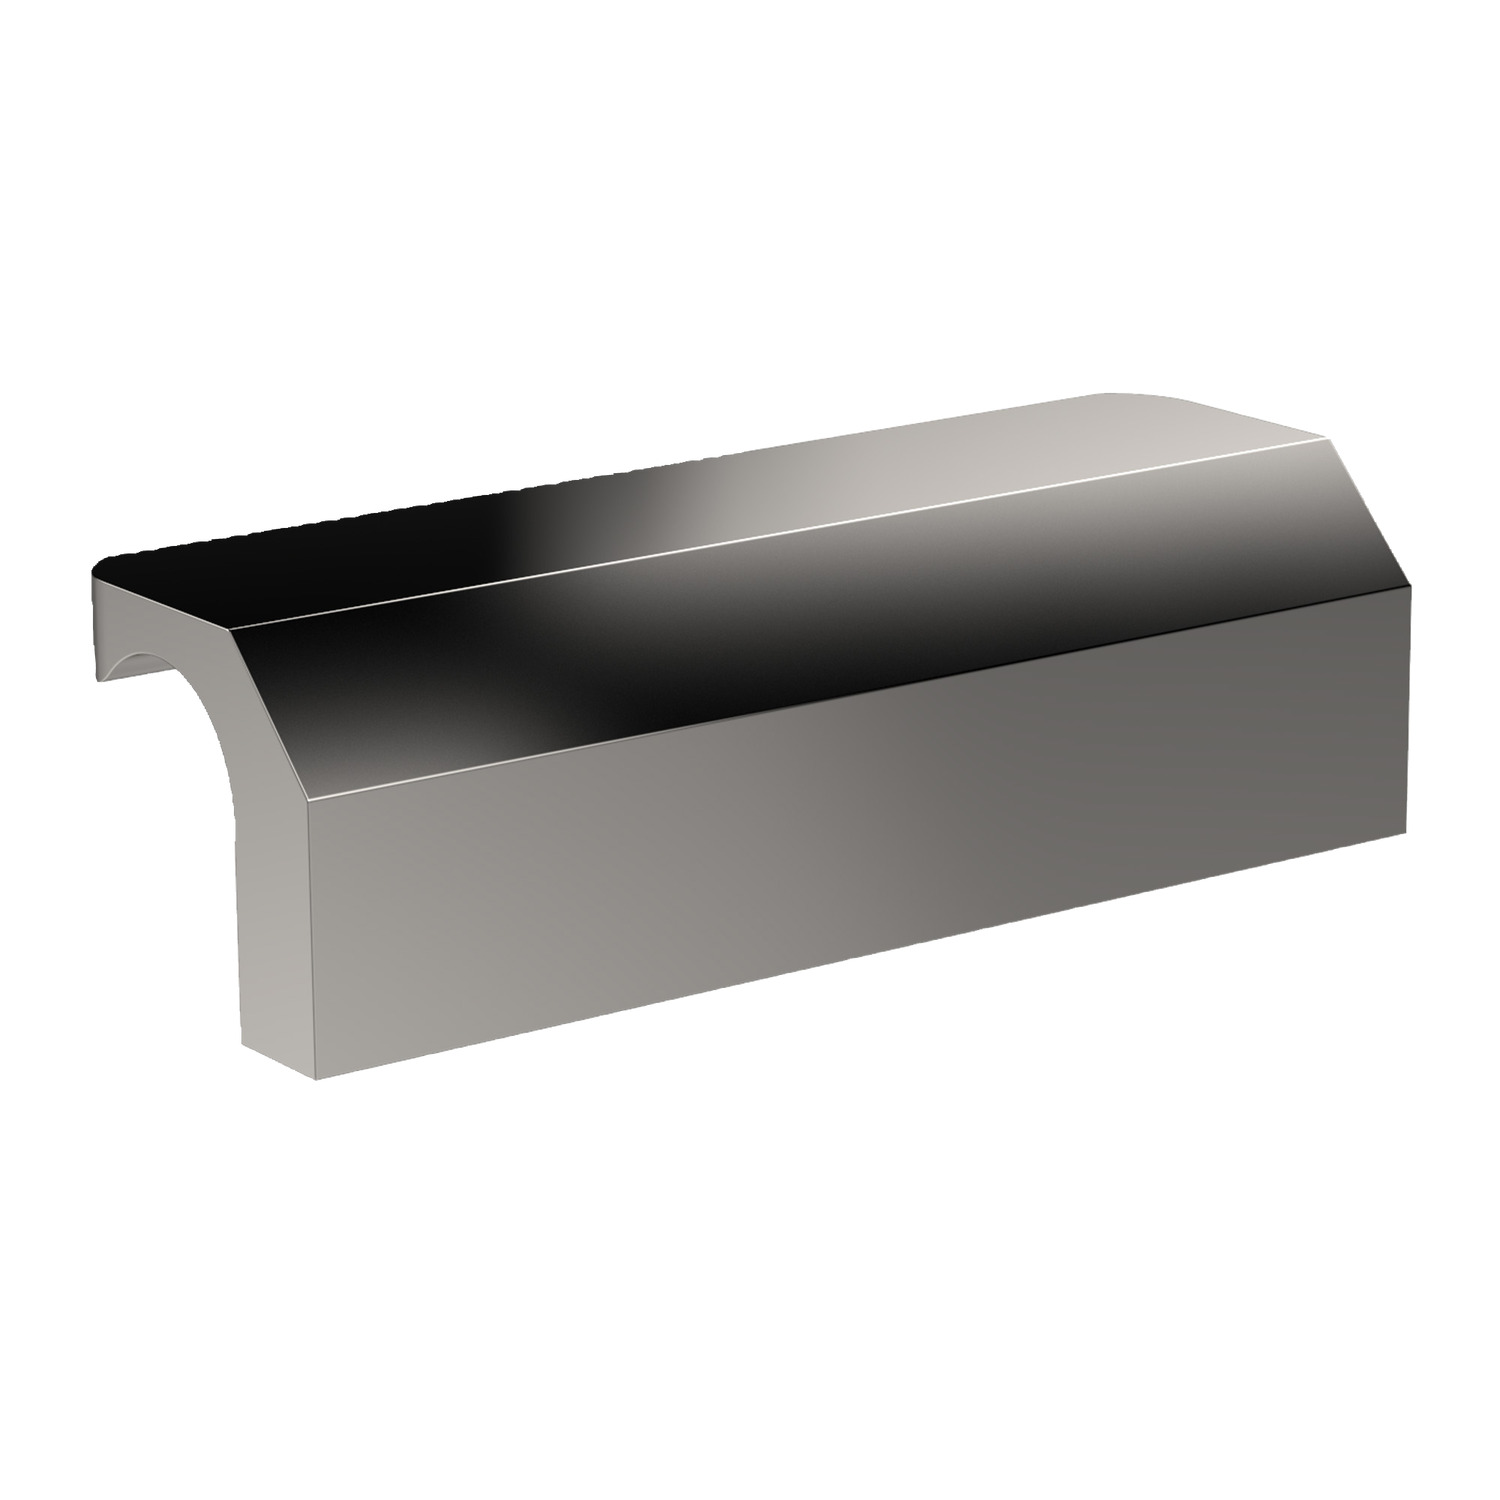 Product 78850, Ledge Handles stainless steel / 